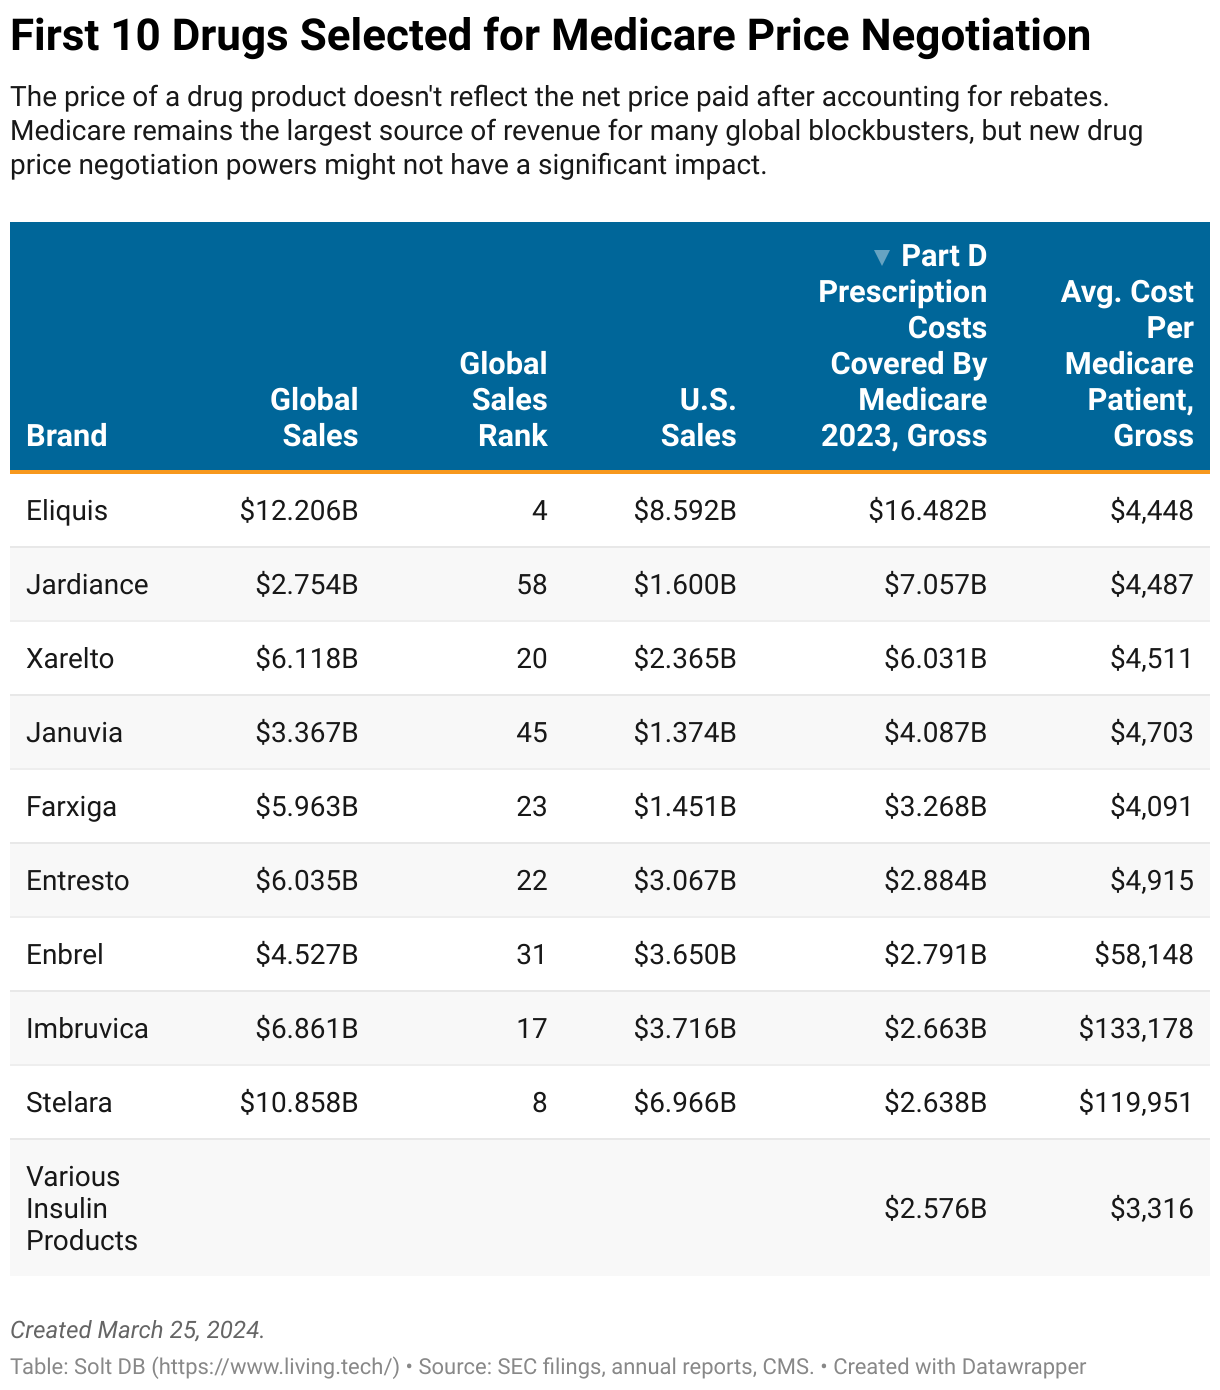 A table showing global revenue, U.S. revenue, global sales rank, and Medicare costs for the first 10 drug products selected for pricing negotiations under the Inflation Reduction Act.